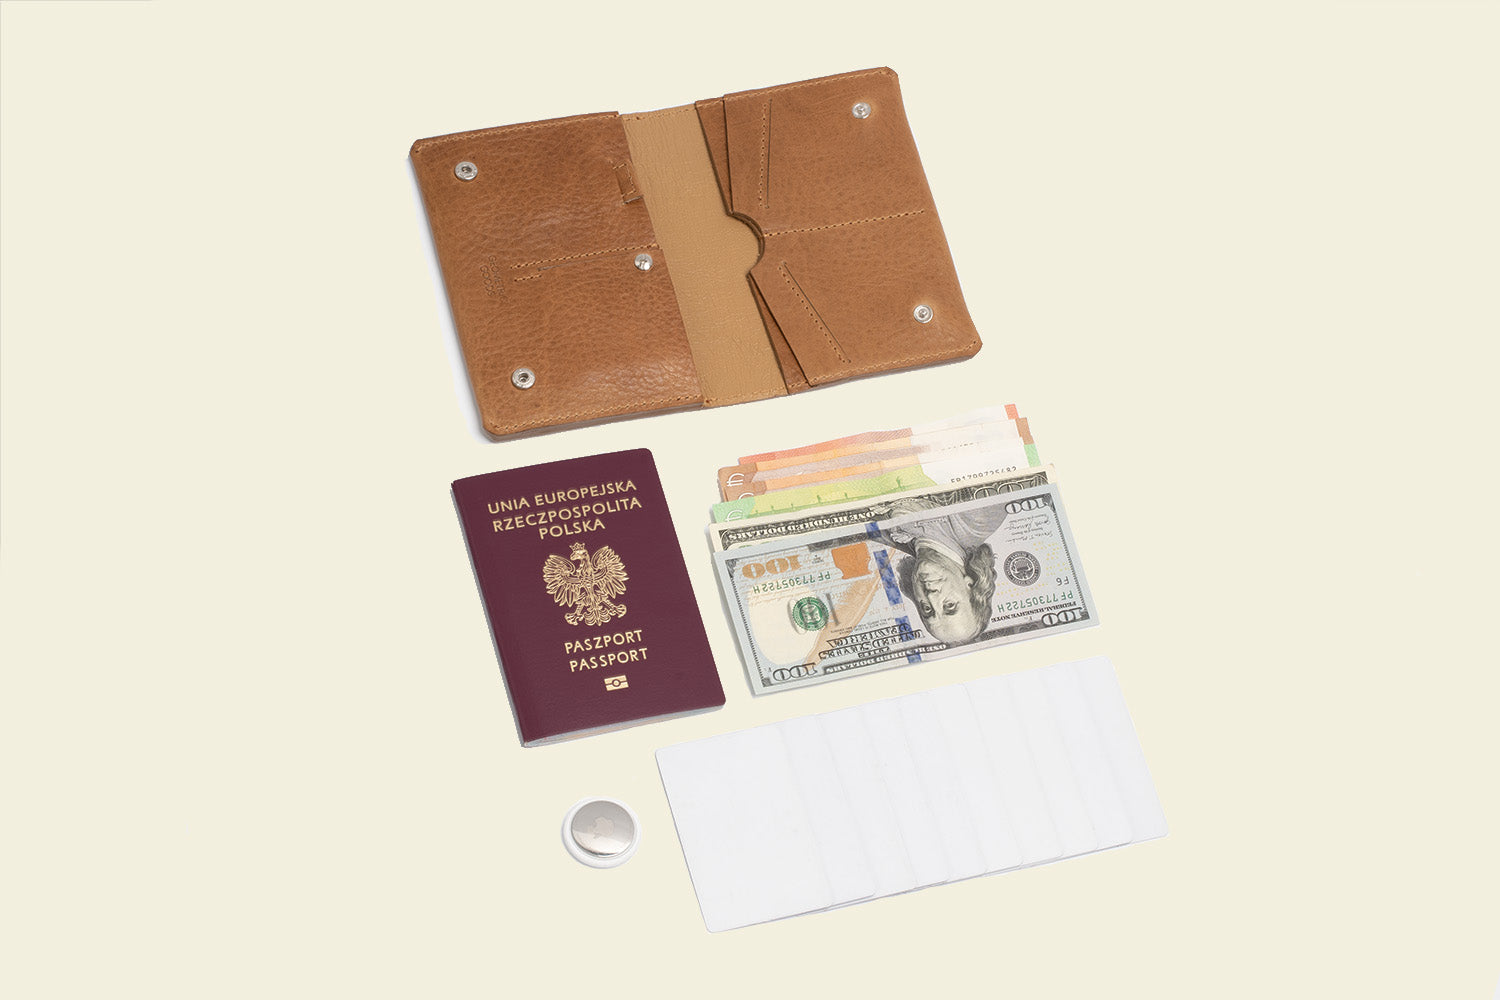 photo of the best air atag passport travel wallet for men and woman in light brown color which hold up to 7 cards and bills passport and airtag